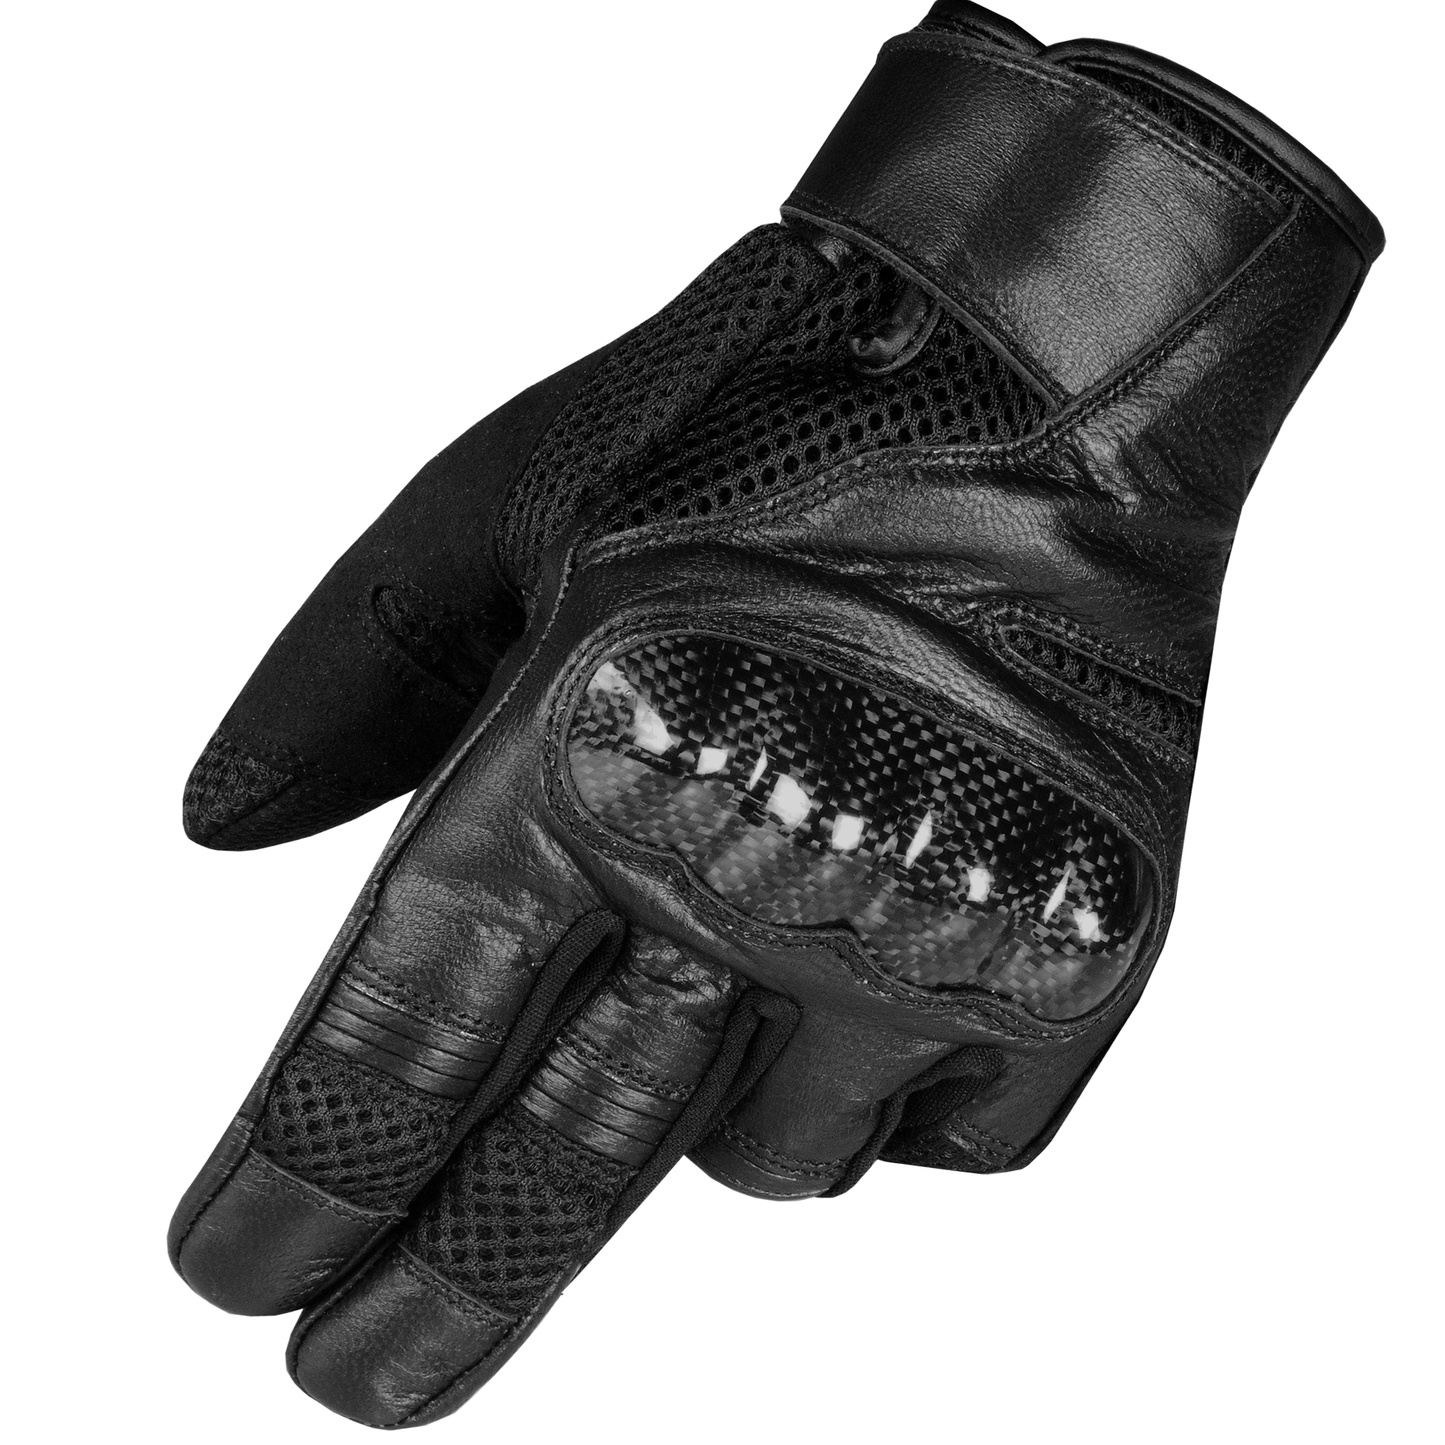 Jackets 4 Bikes Men's AirGrp Motorcycle Gloves Touchscreen Leather Street Cruiser Dirt Bike Protective Breathable